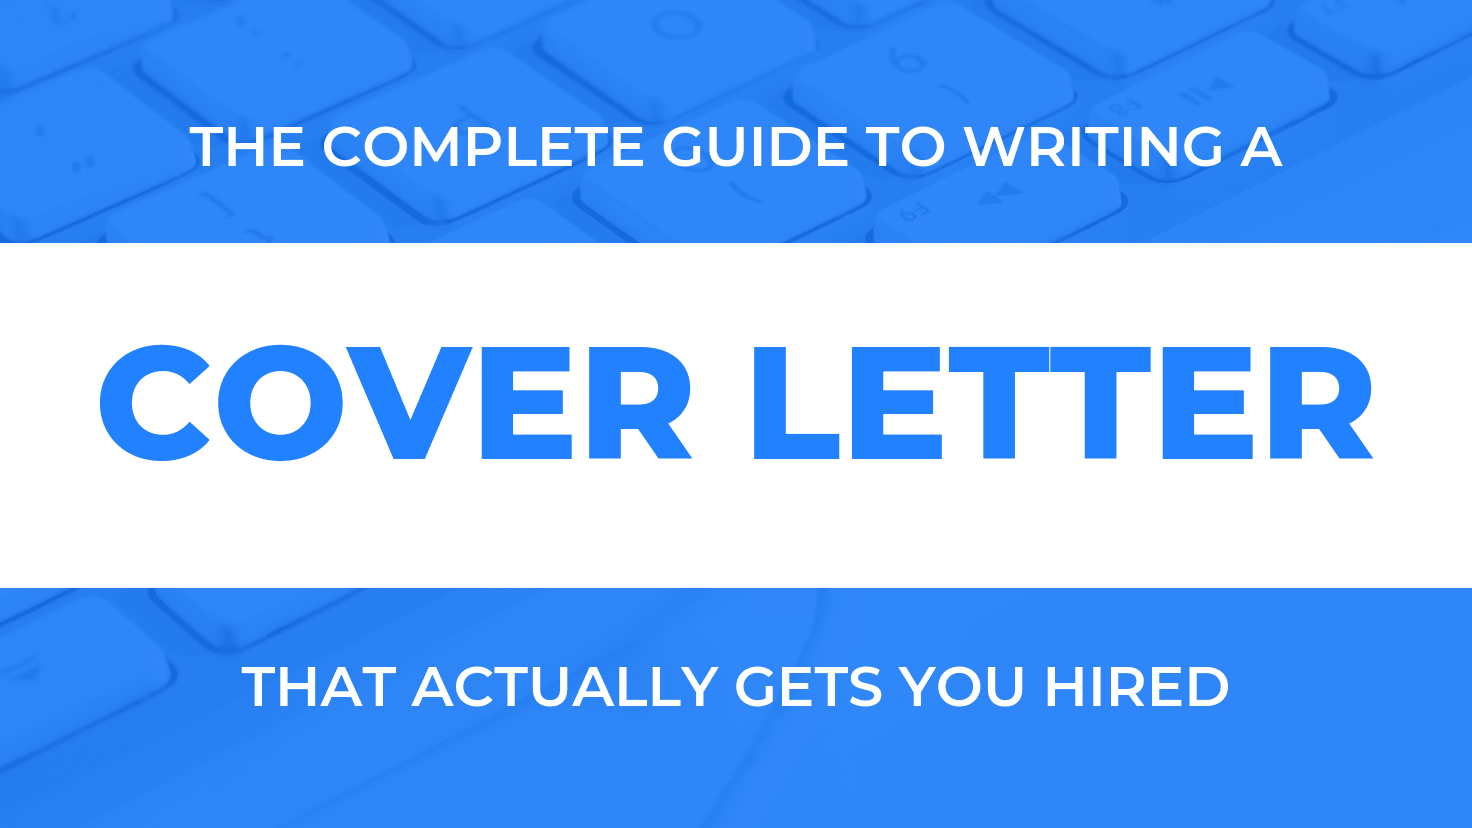 Help Writing A Cover Letter from cultivatedculture.com